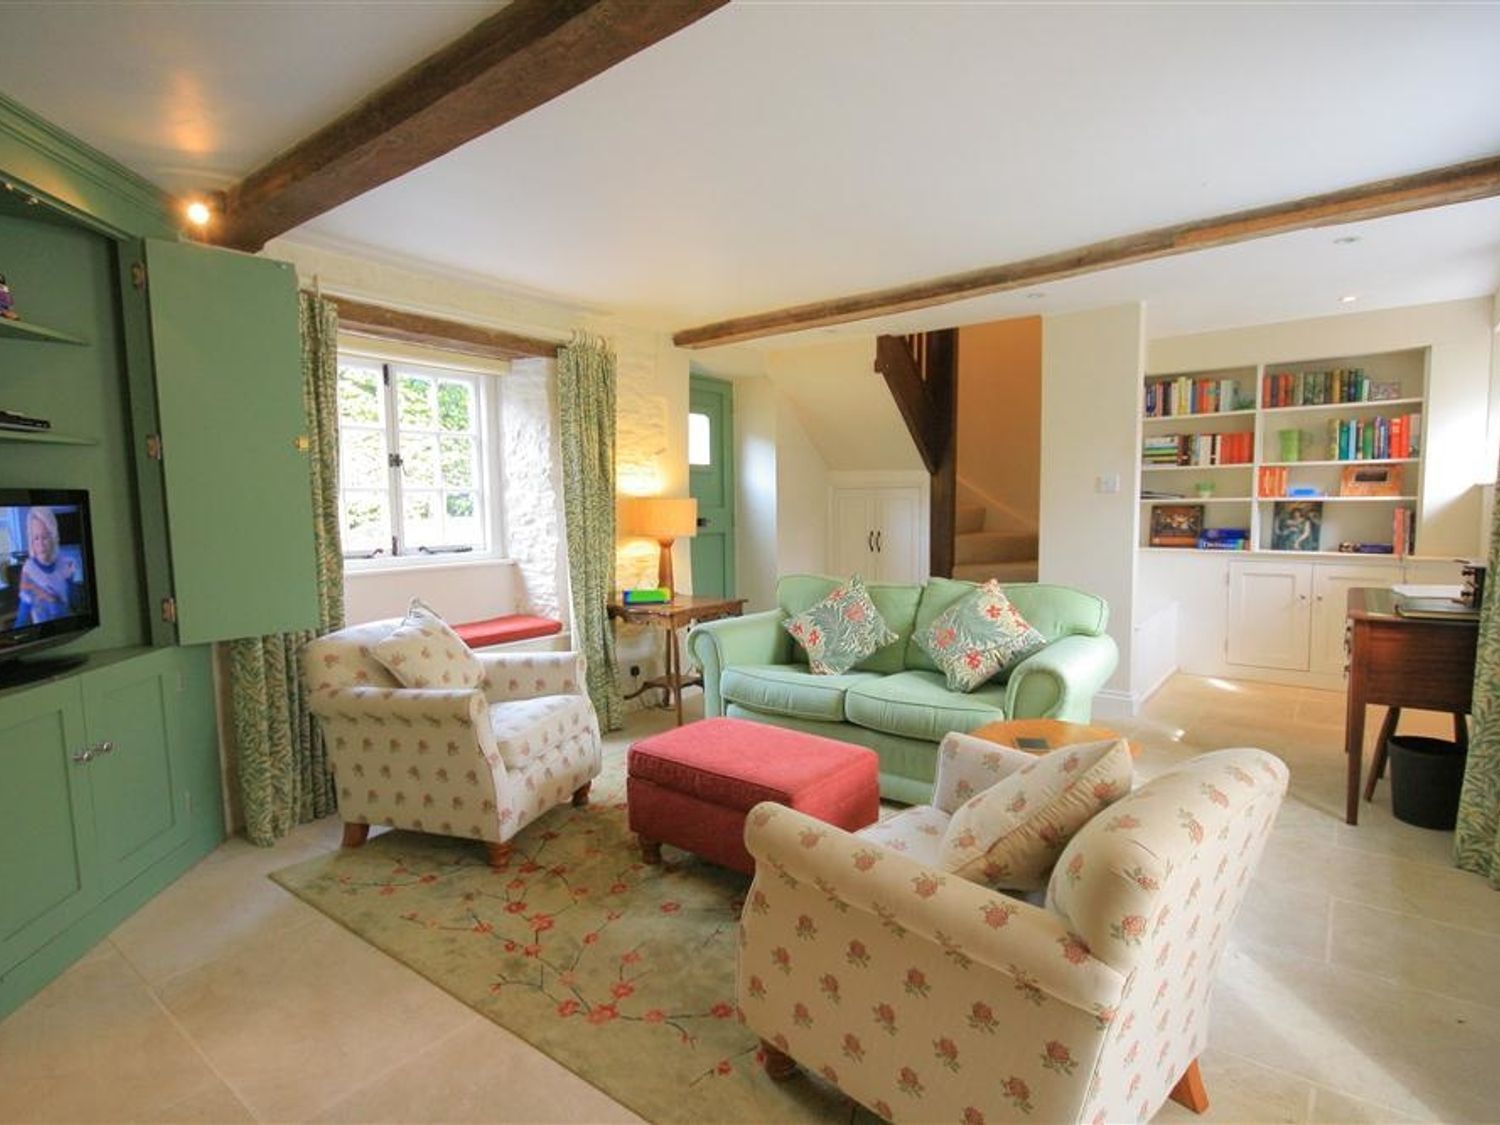 Keen Cottage - Cotswolds - 988993 - photo 1